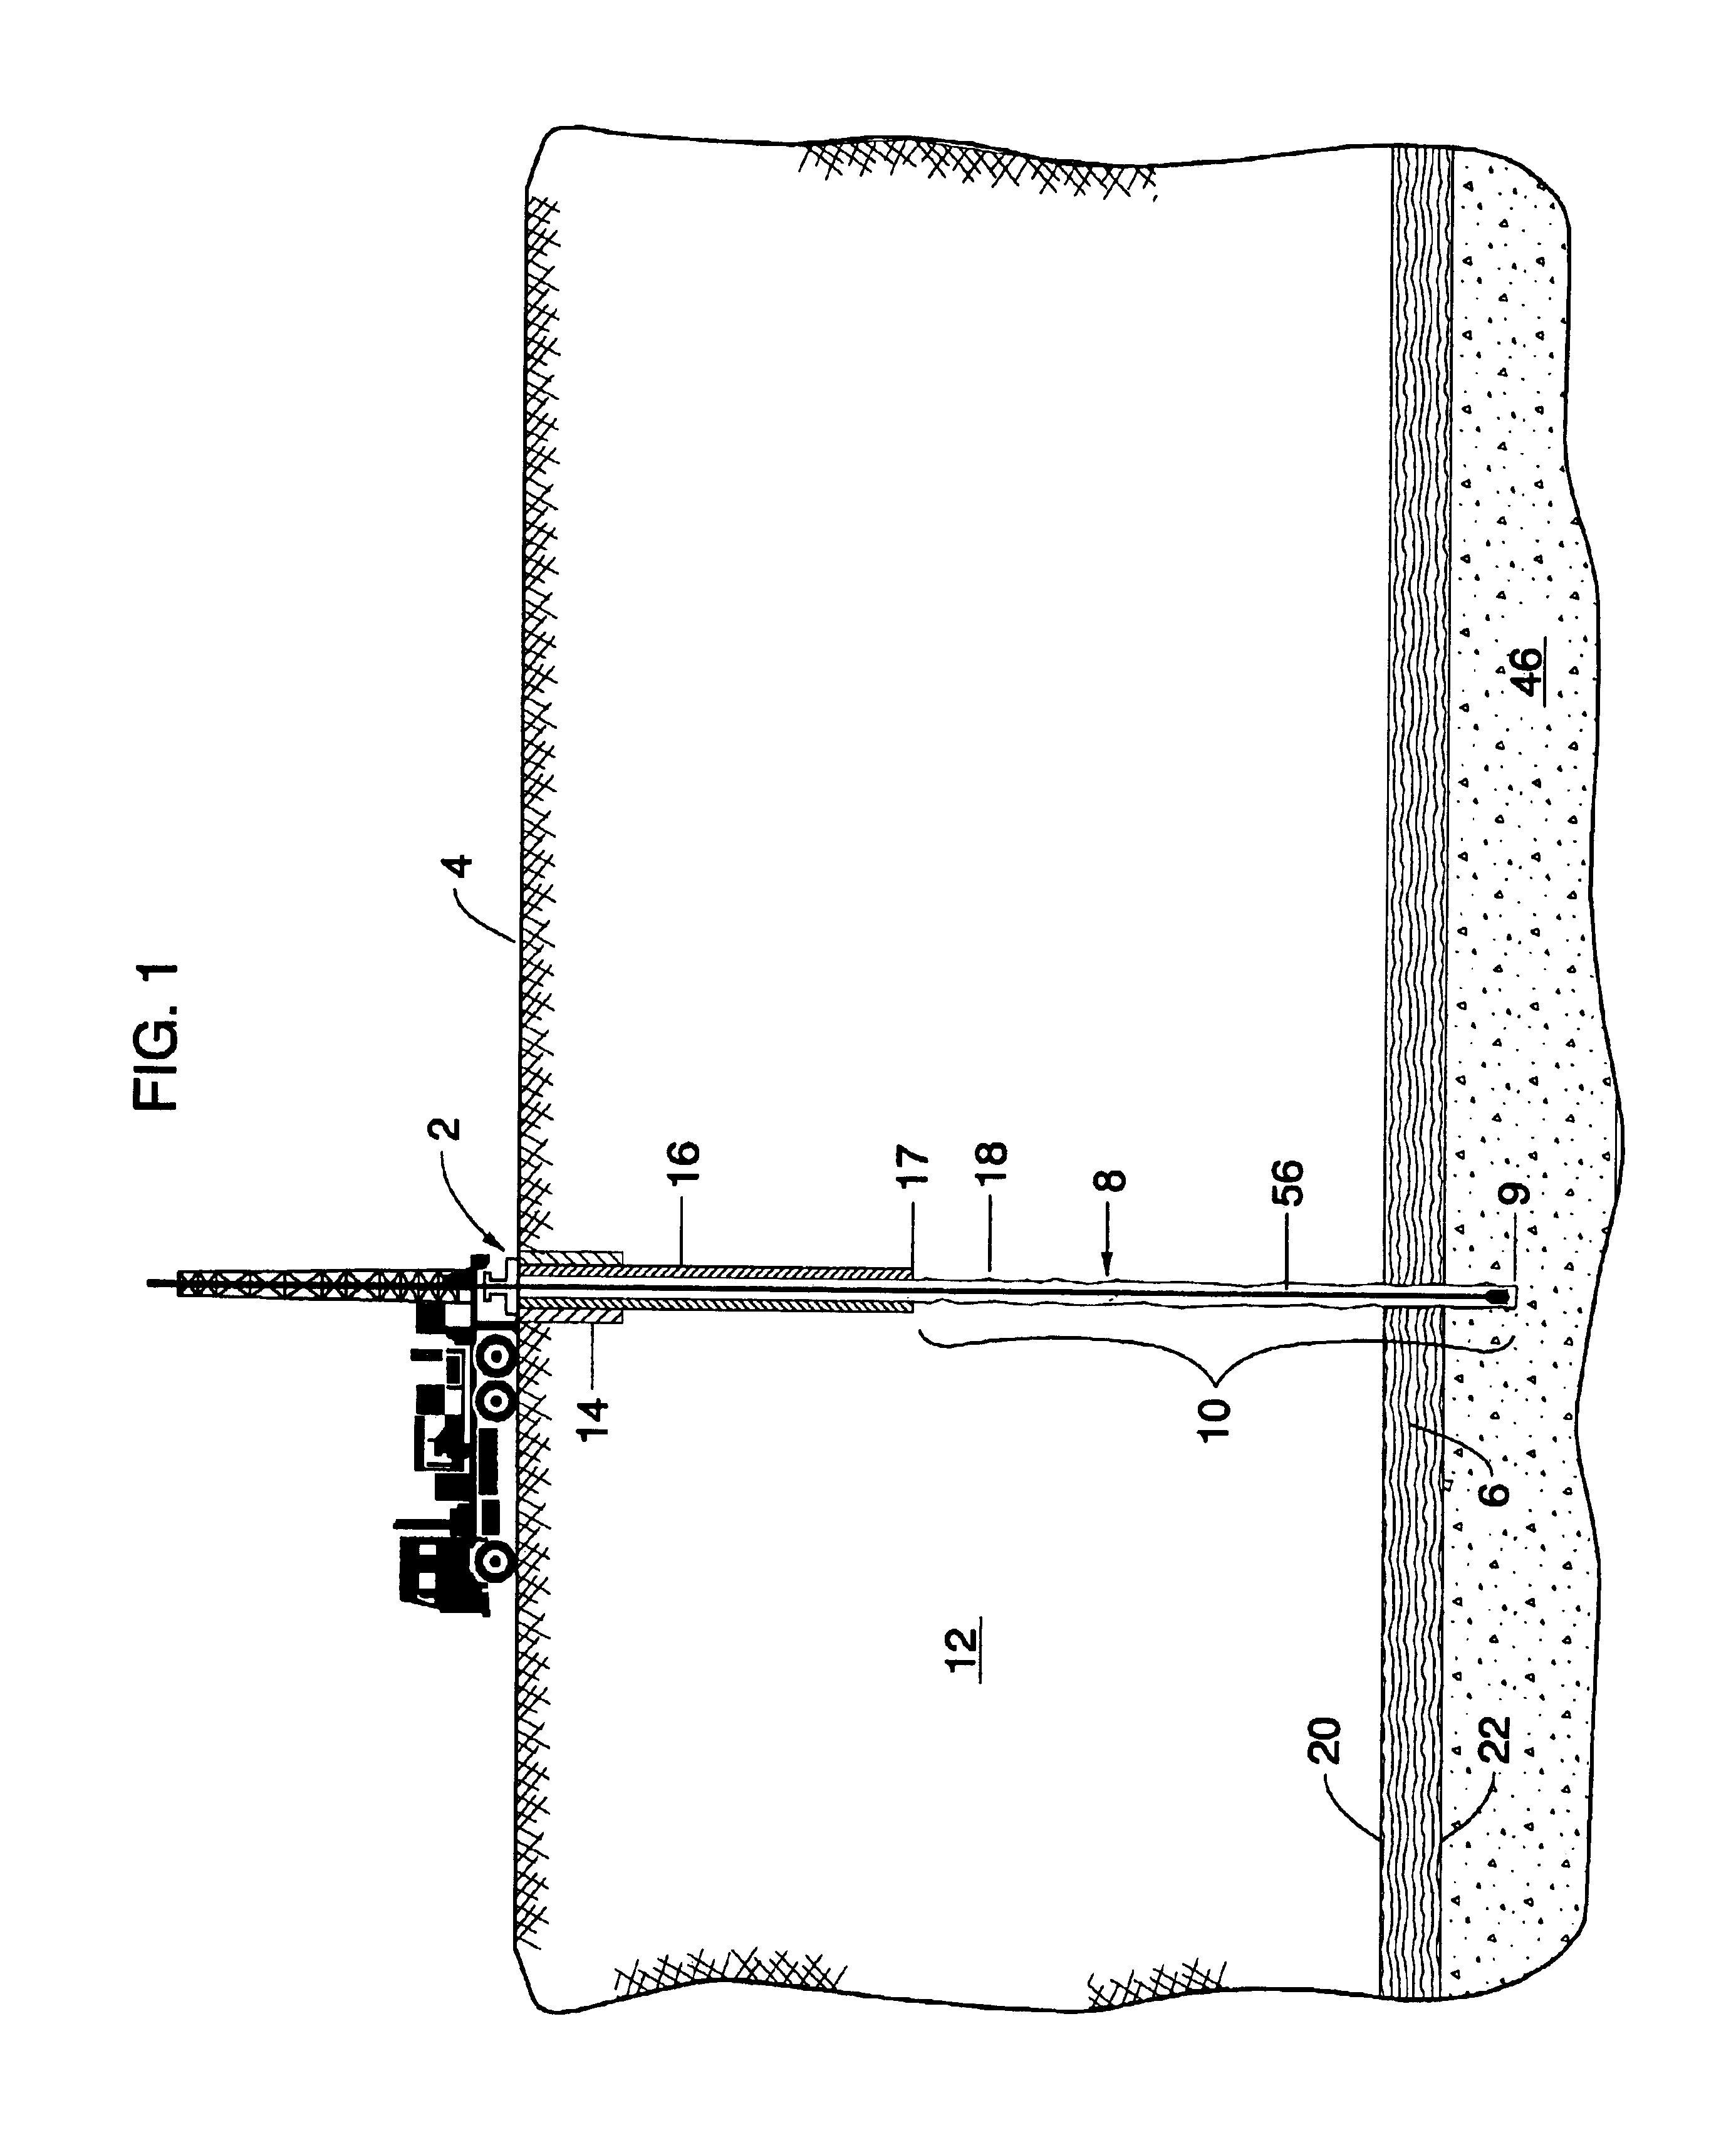 Method for making a well for removing fluid from a desired subterranean formation